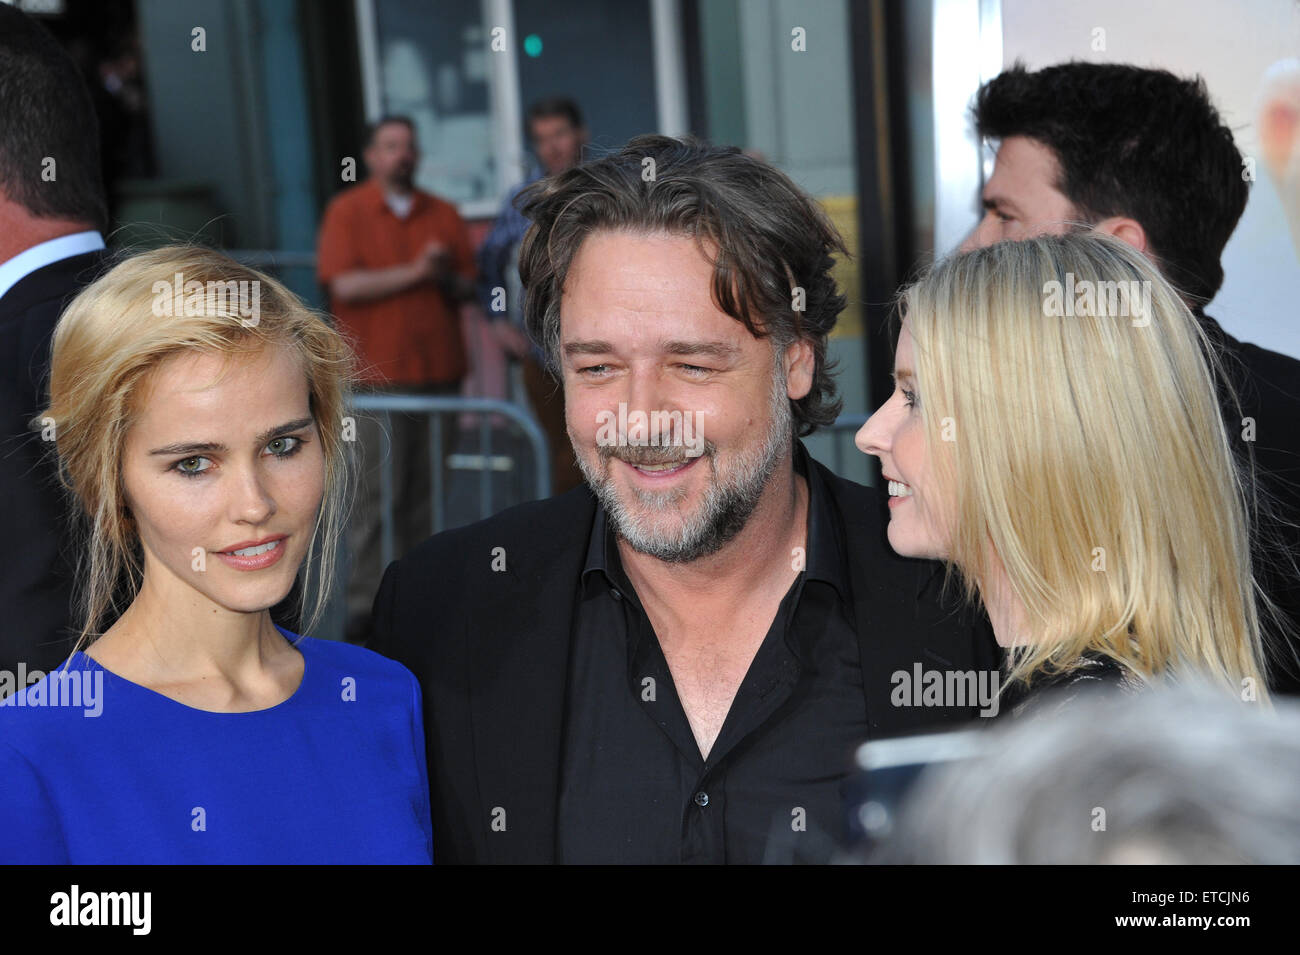 LOS ANGELES, CA - APRIL 16, 2015: Russell Crowe, Isabel Lucas & Jacqueline McKenzie (right) at the Los Angeles premiere of their movie 'The Water Diviner' at the TCL Chinese Theatre, Hollywood. Stock Photo